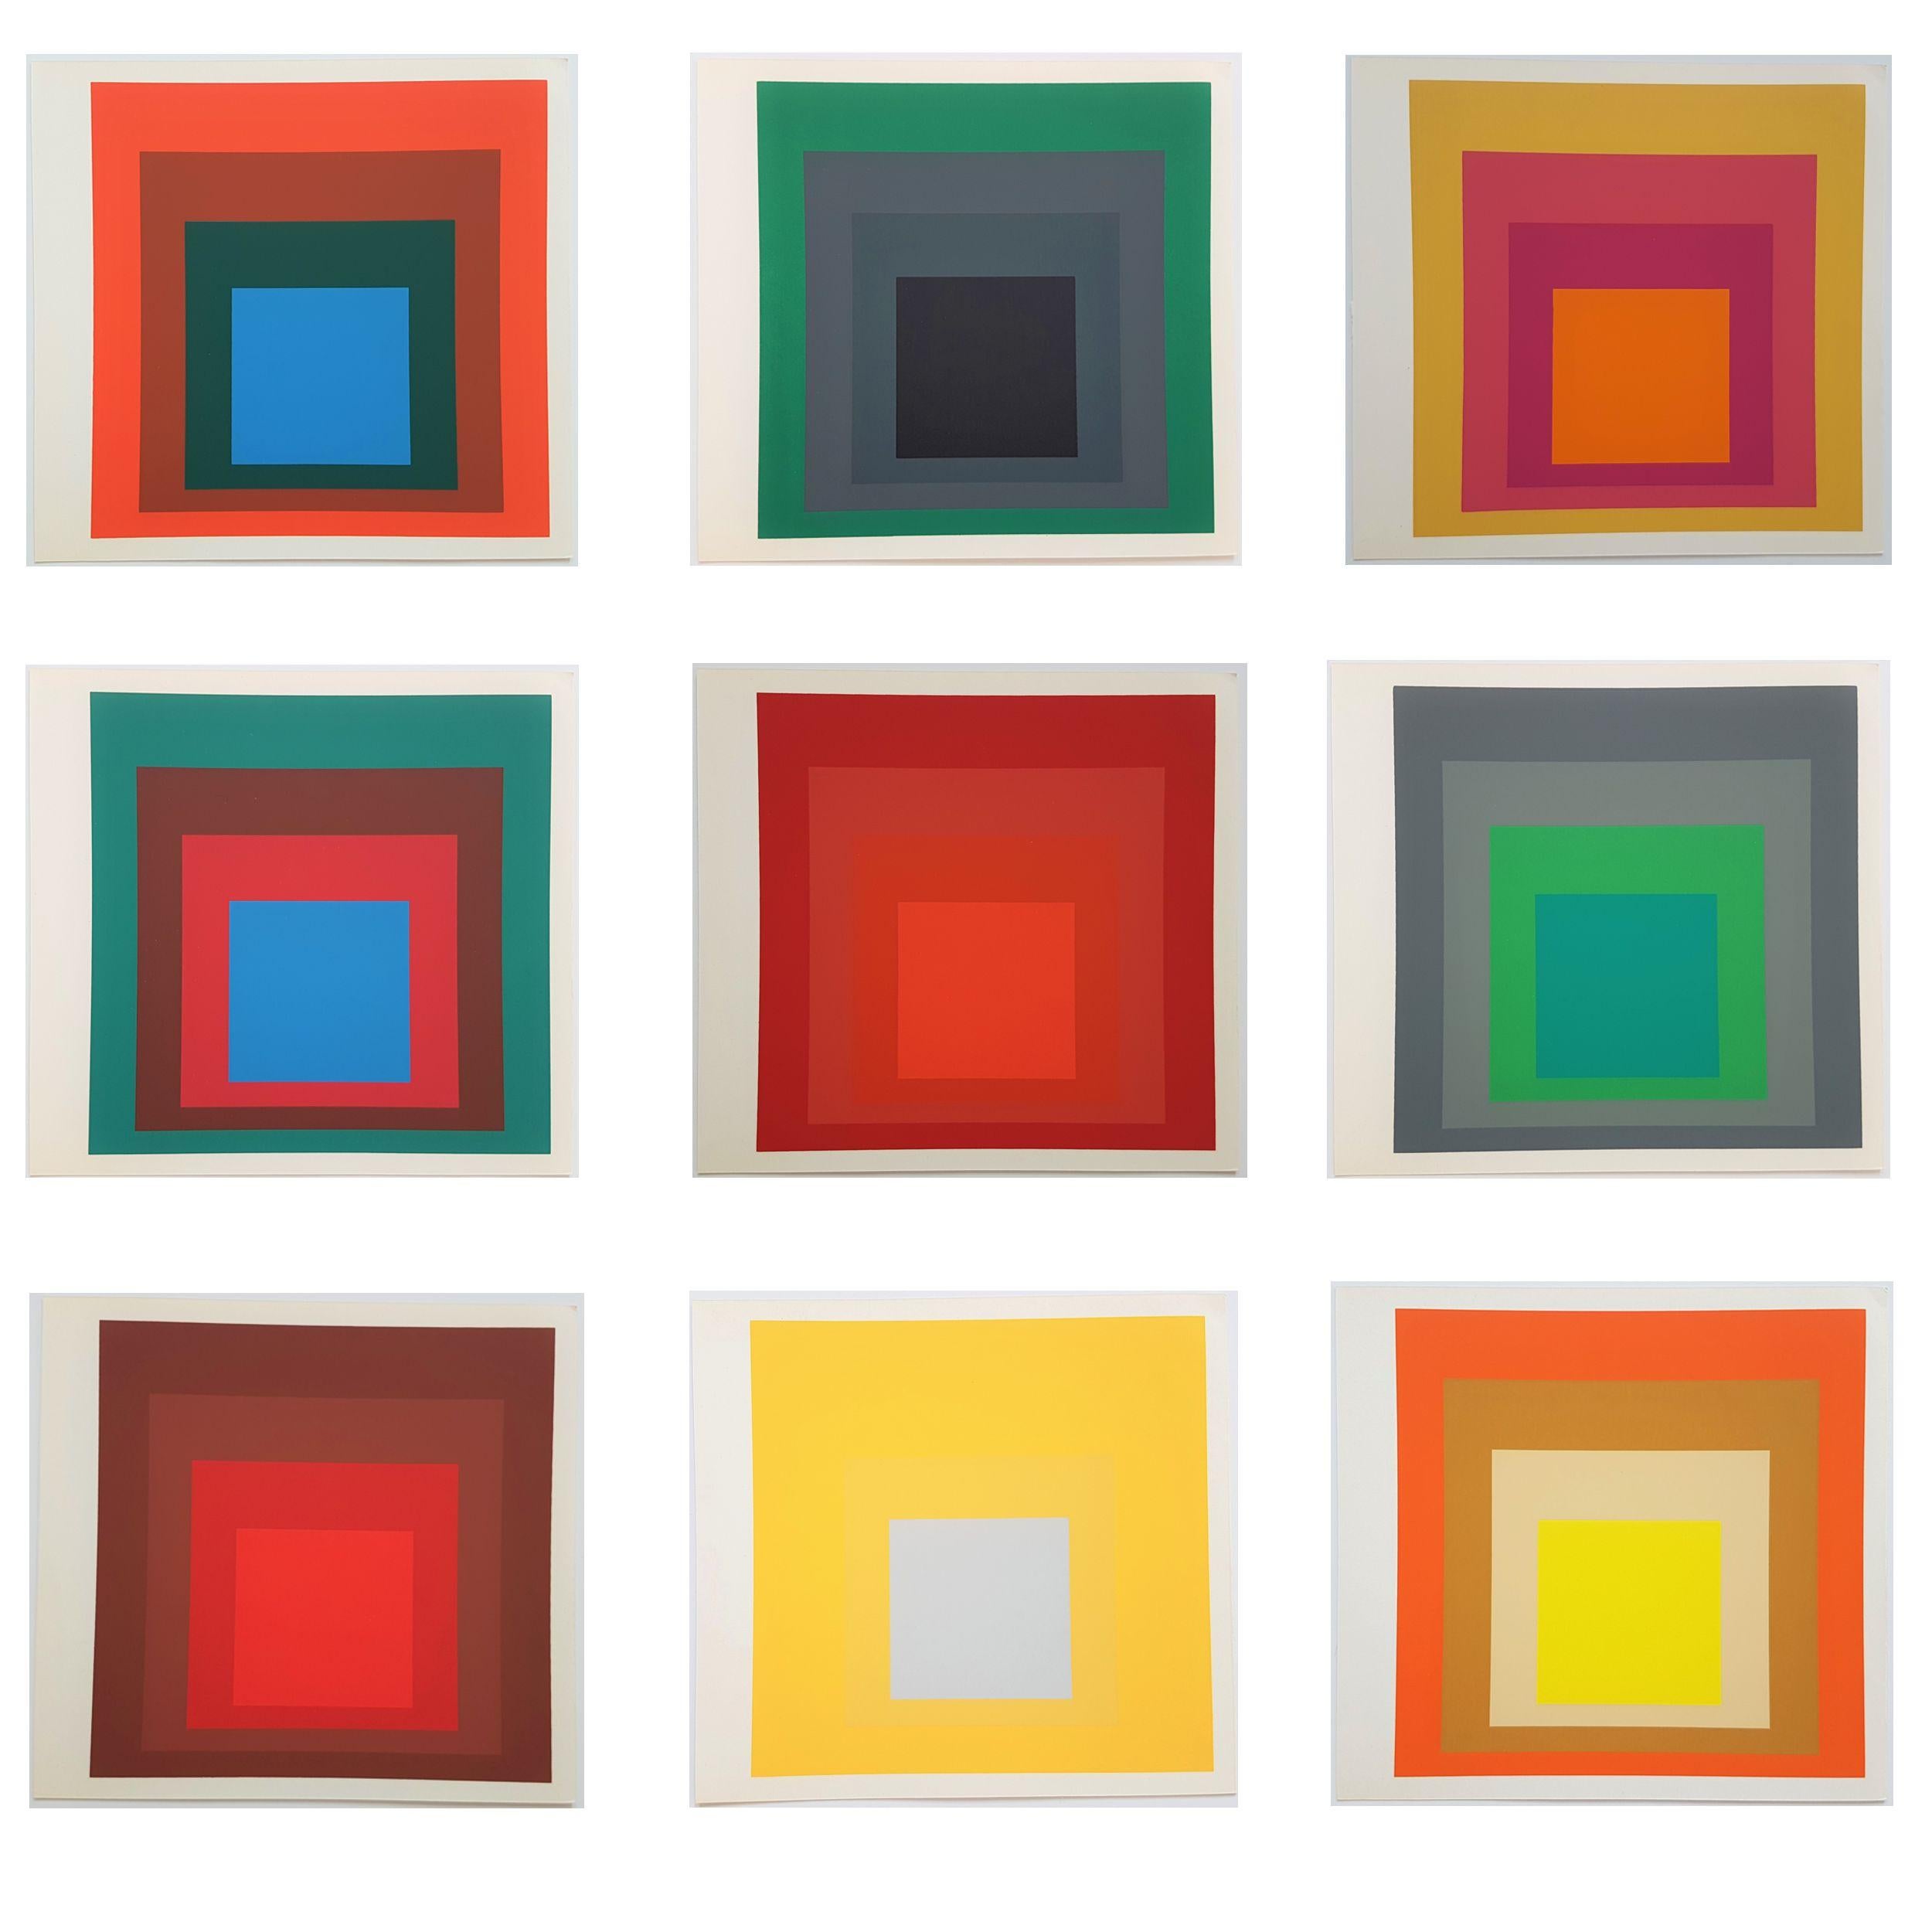 (after) Josef Albers Abstract Print - "ALBERS" - FOLIO OF NINE (9) SCREEN PRINTS (~50% OFF - LIMITED TIME ONLY)